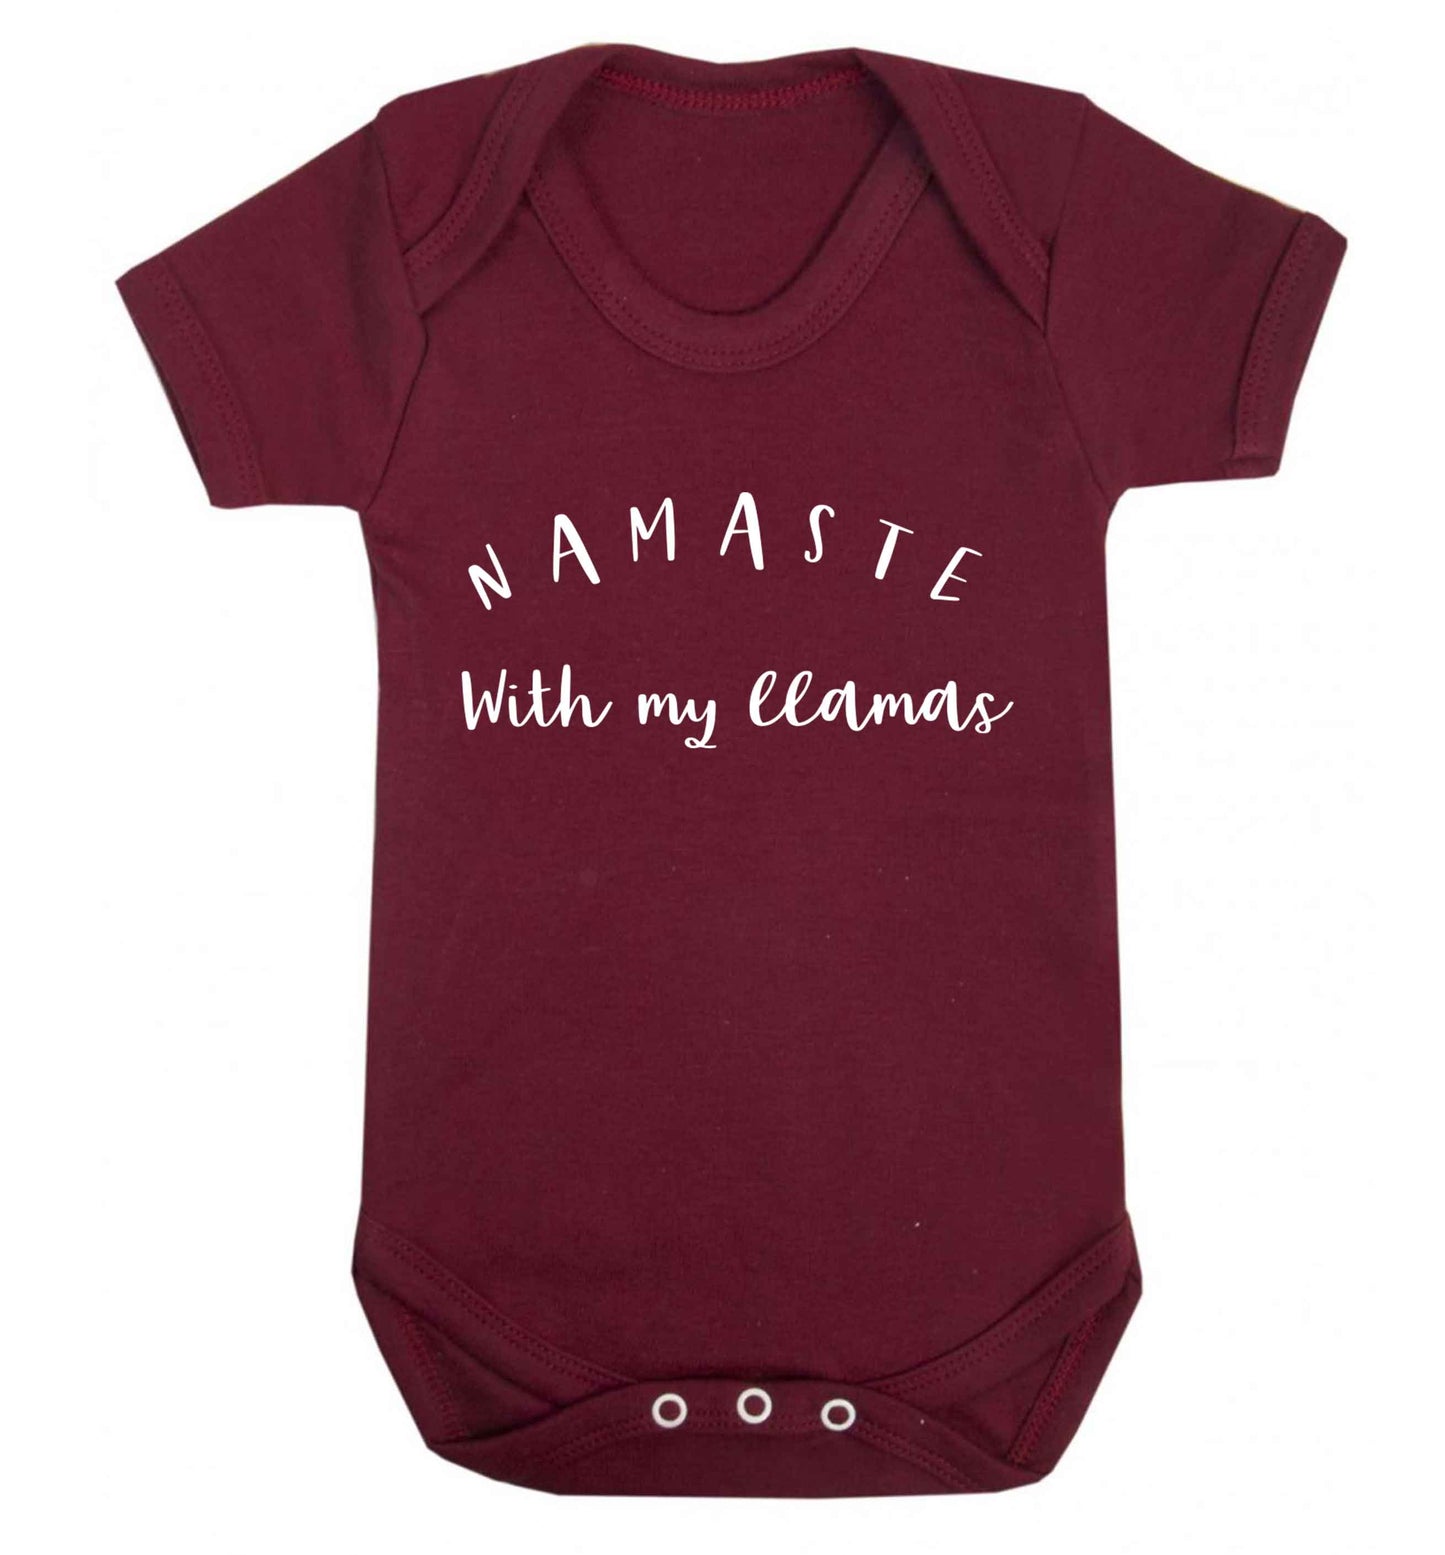 Namaste with my llamas Baby Vest maroon 18-24 months